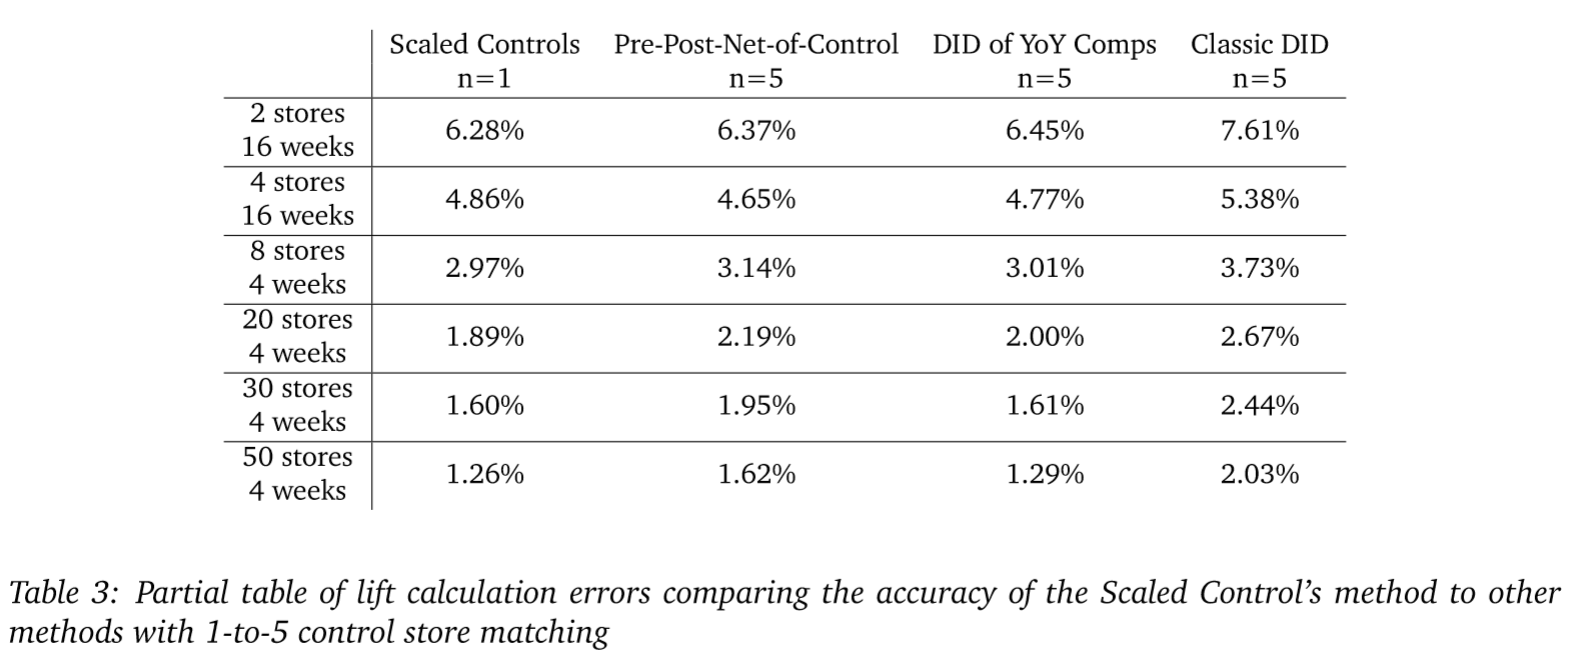 Partial table of lift calculation errors comparing the accuracy of the Scaled Control's method to other methods with 1-to-5 control matches.